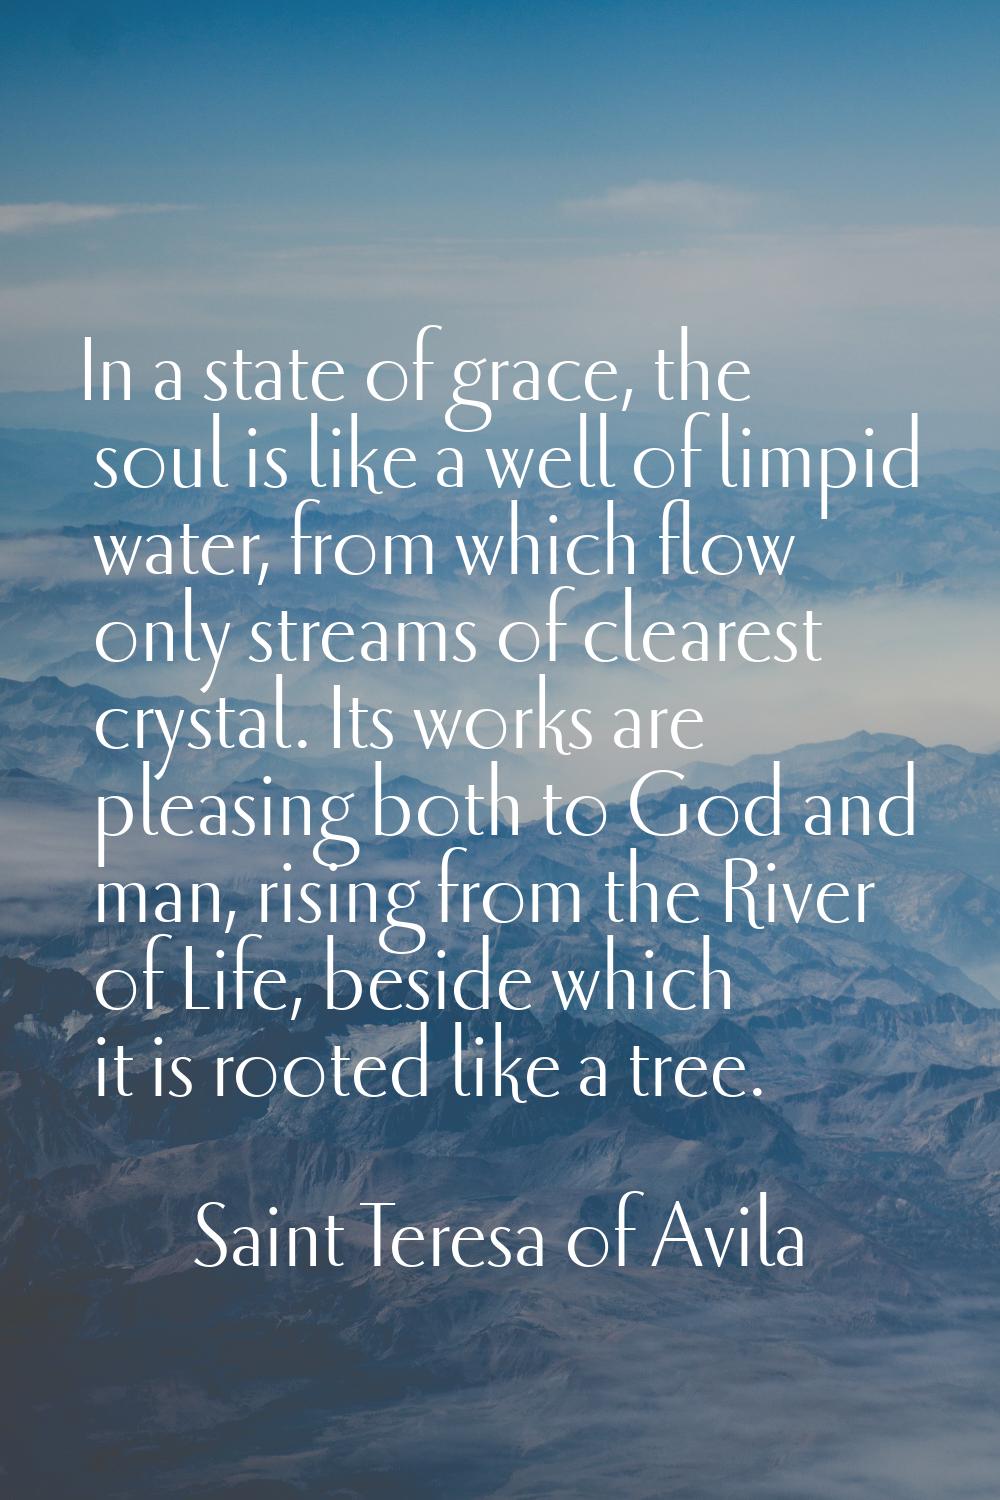 In a state of grace, the soul is like a well of limpid water, from which flow only streams of clear